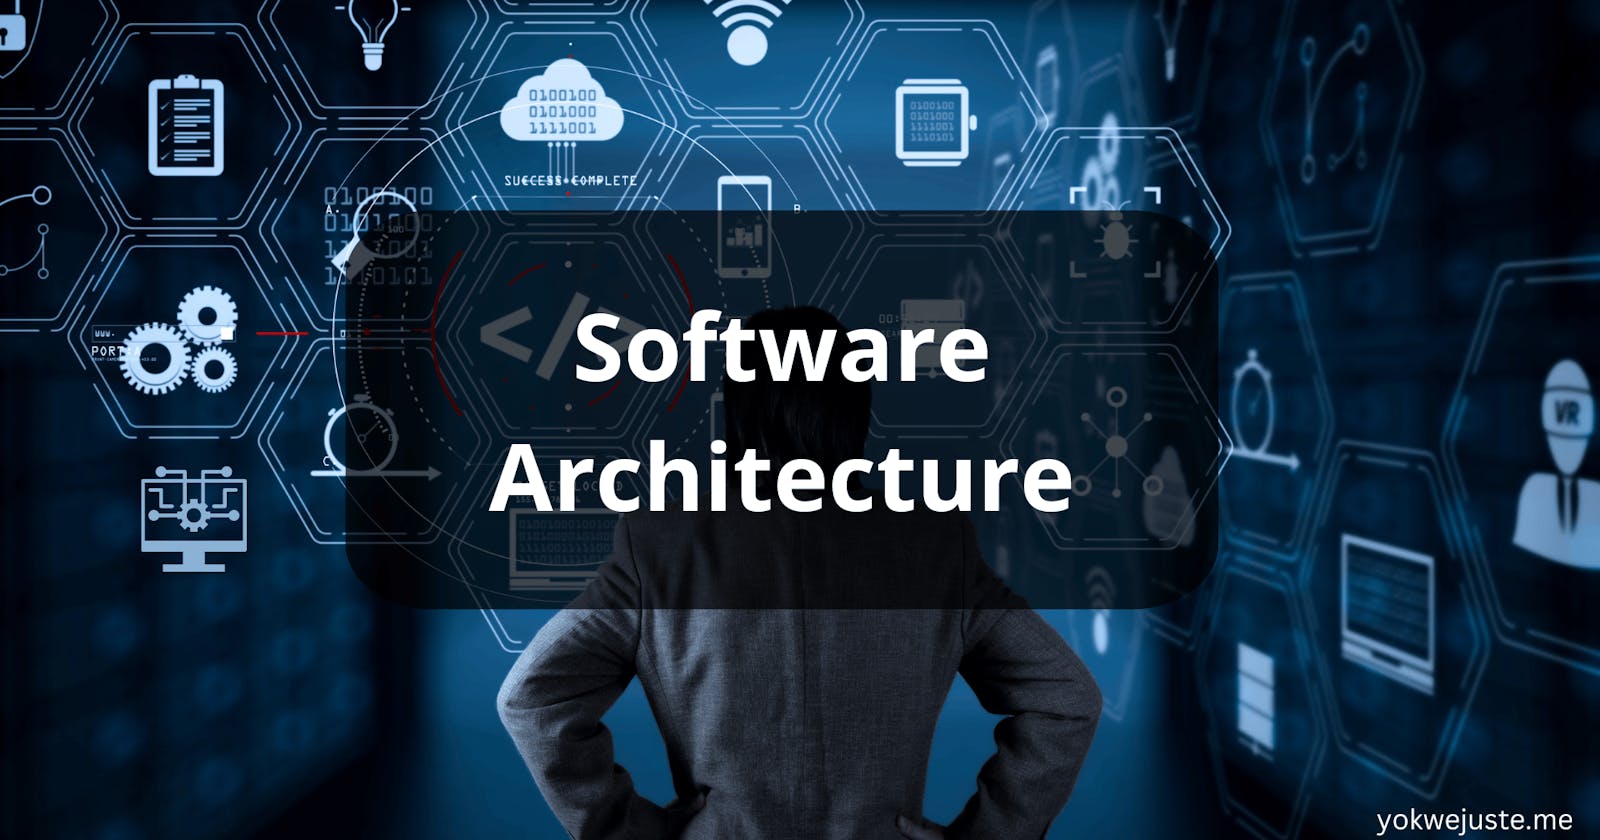 What is Software Architecture?